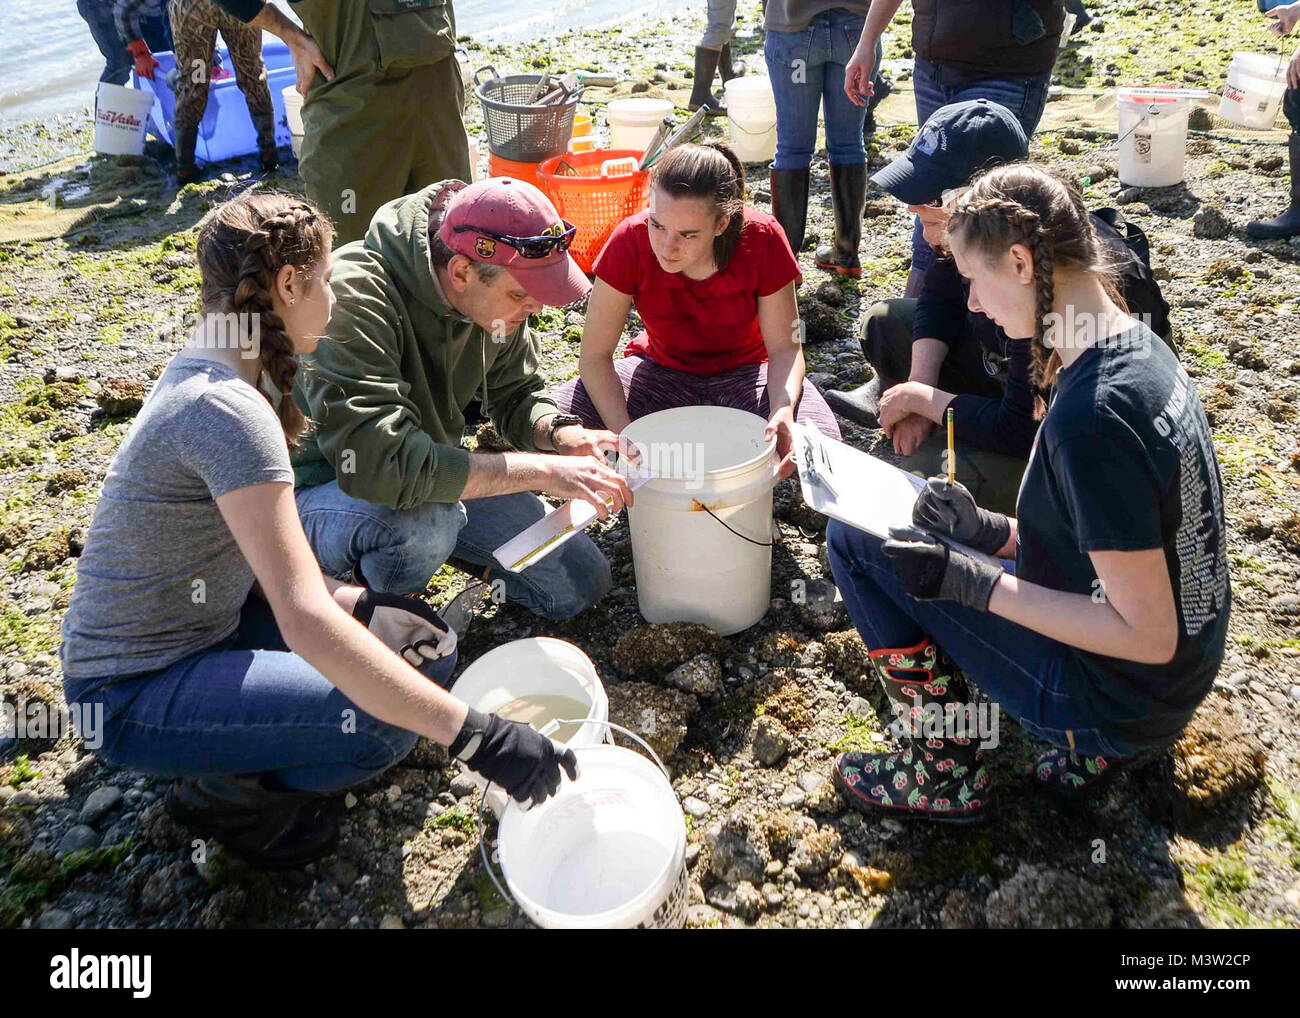 170428-N-VH385-027 INDIAN ISLAND, Wash. (April 28, 2017) – Jake Gregg, a fishery biologist with the United States Geological Survey (USGS), measures a fish with students from Blue Heron Middle School during a community outreach beach seining at Naval Magazine Indian Island. This is the third year the USGS has teamed up with Blue Heron Middle School and Naval Magazine Indian Island to conduct beach seinings in preparation for the Kilsut Spit waterflow to be opened between Marrowstone and Indian Island. (U.S. Navy photo by Mass Communication Specialist 3rd Class Wyatt L. Anthony) 170428-N-VH385- Stock Photo